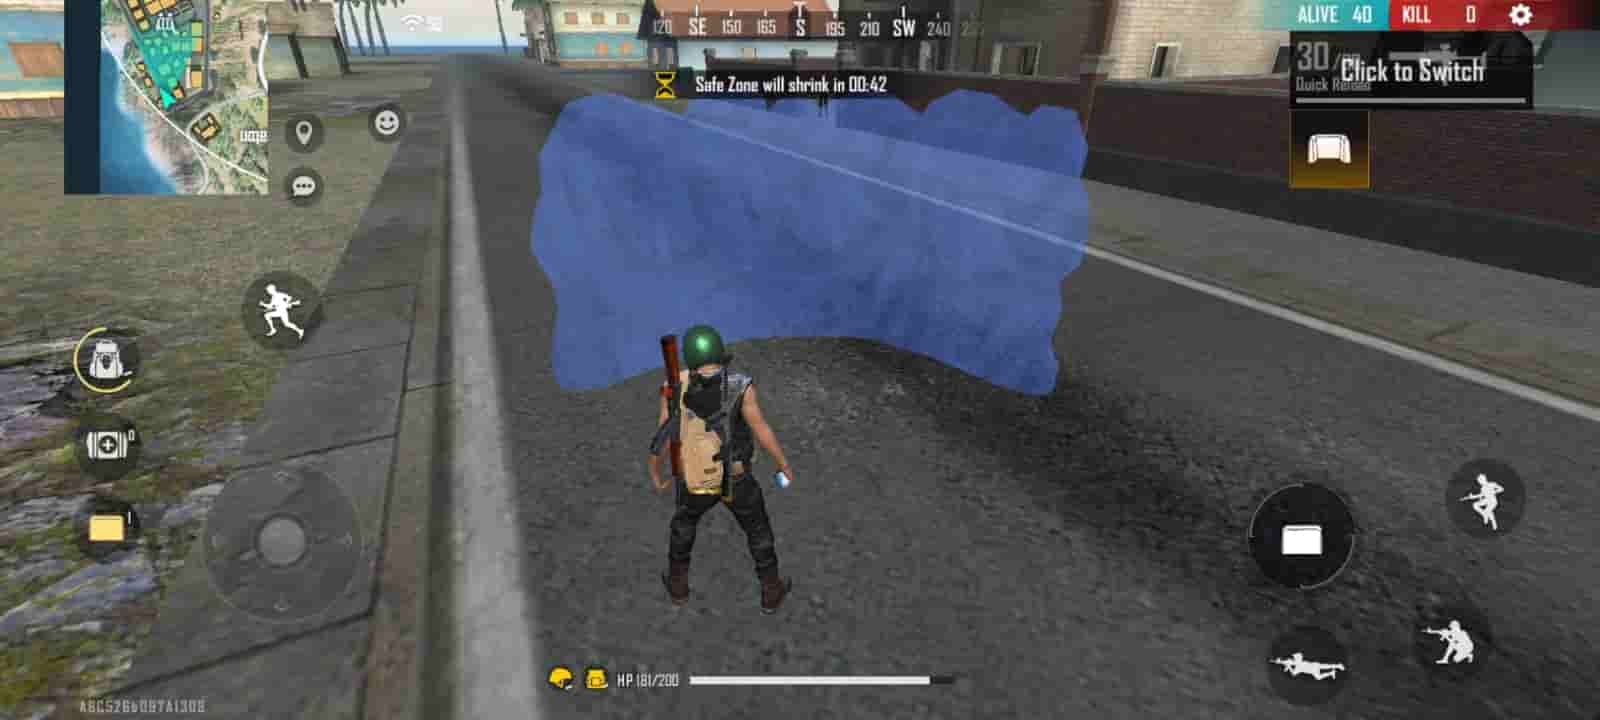 5 tips to use gloo walls in free fire max, tips to use gloo walls in free fire max, how to use gloo walls in free fire max, free fire max, free fire max tricks and tips, free fire max new update